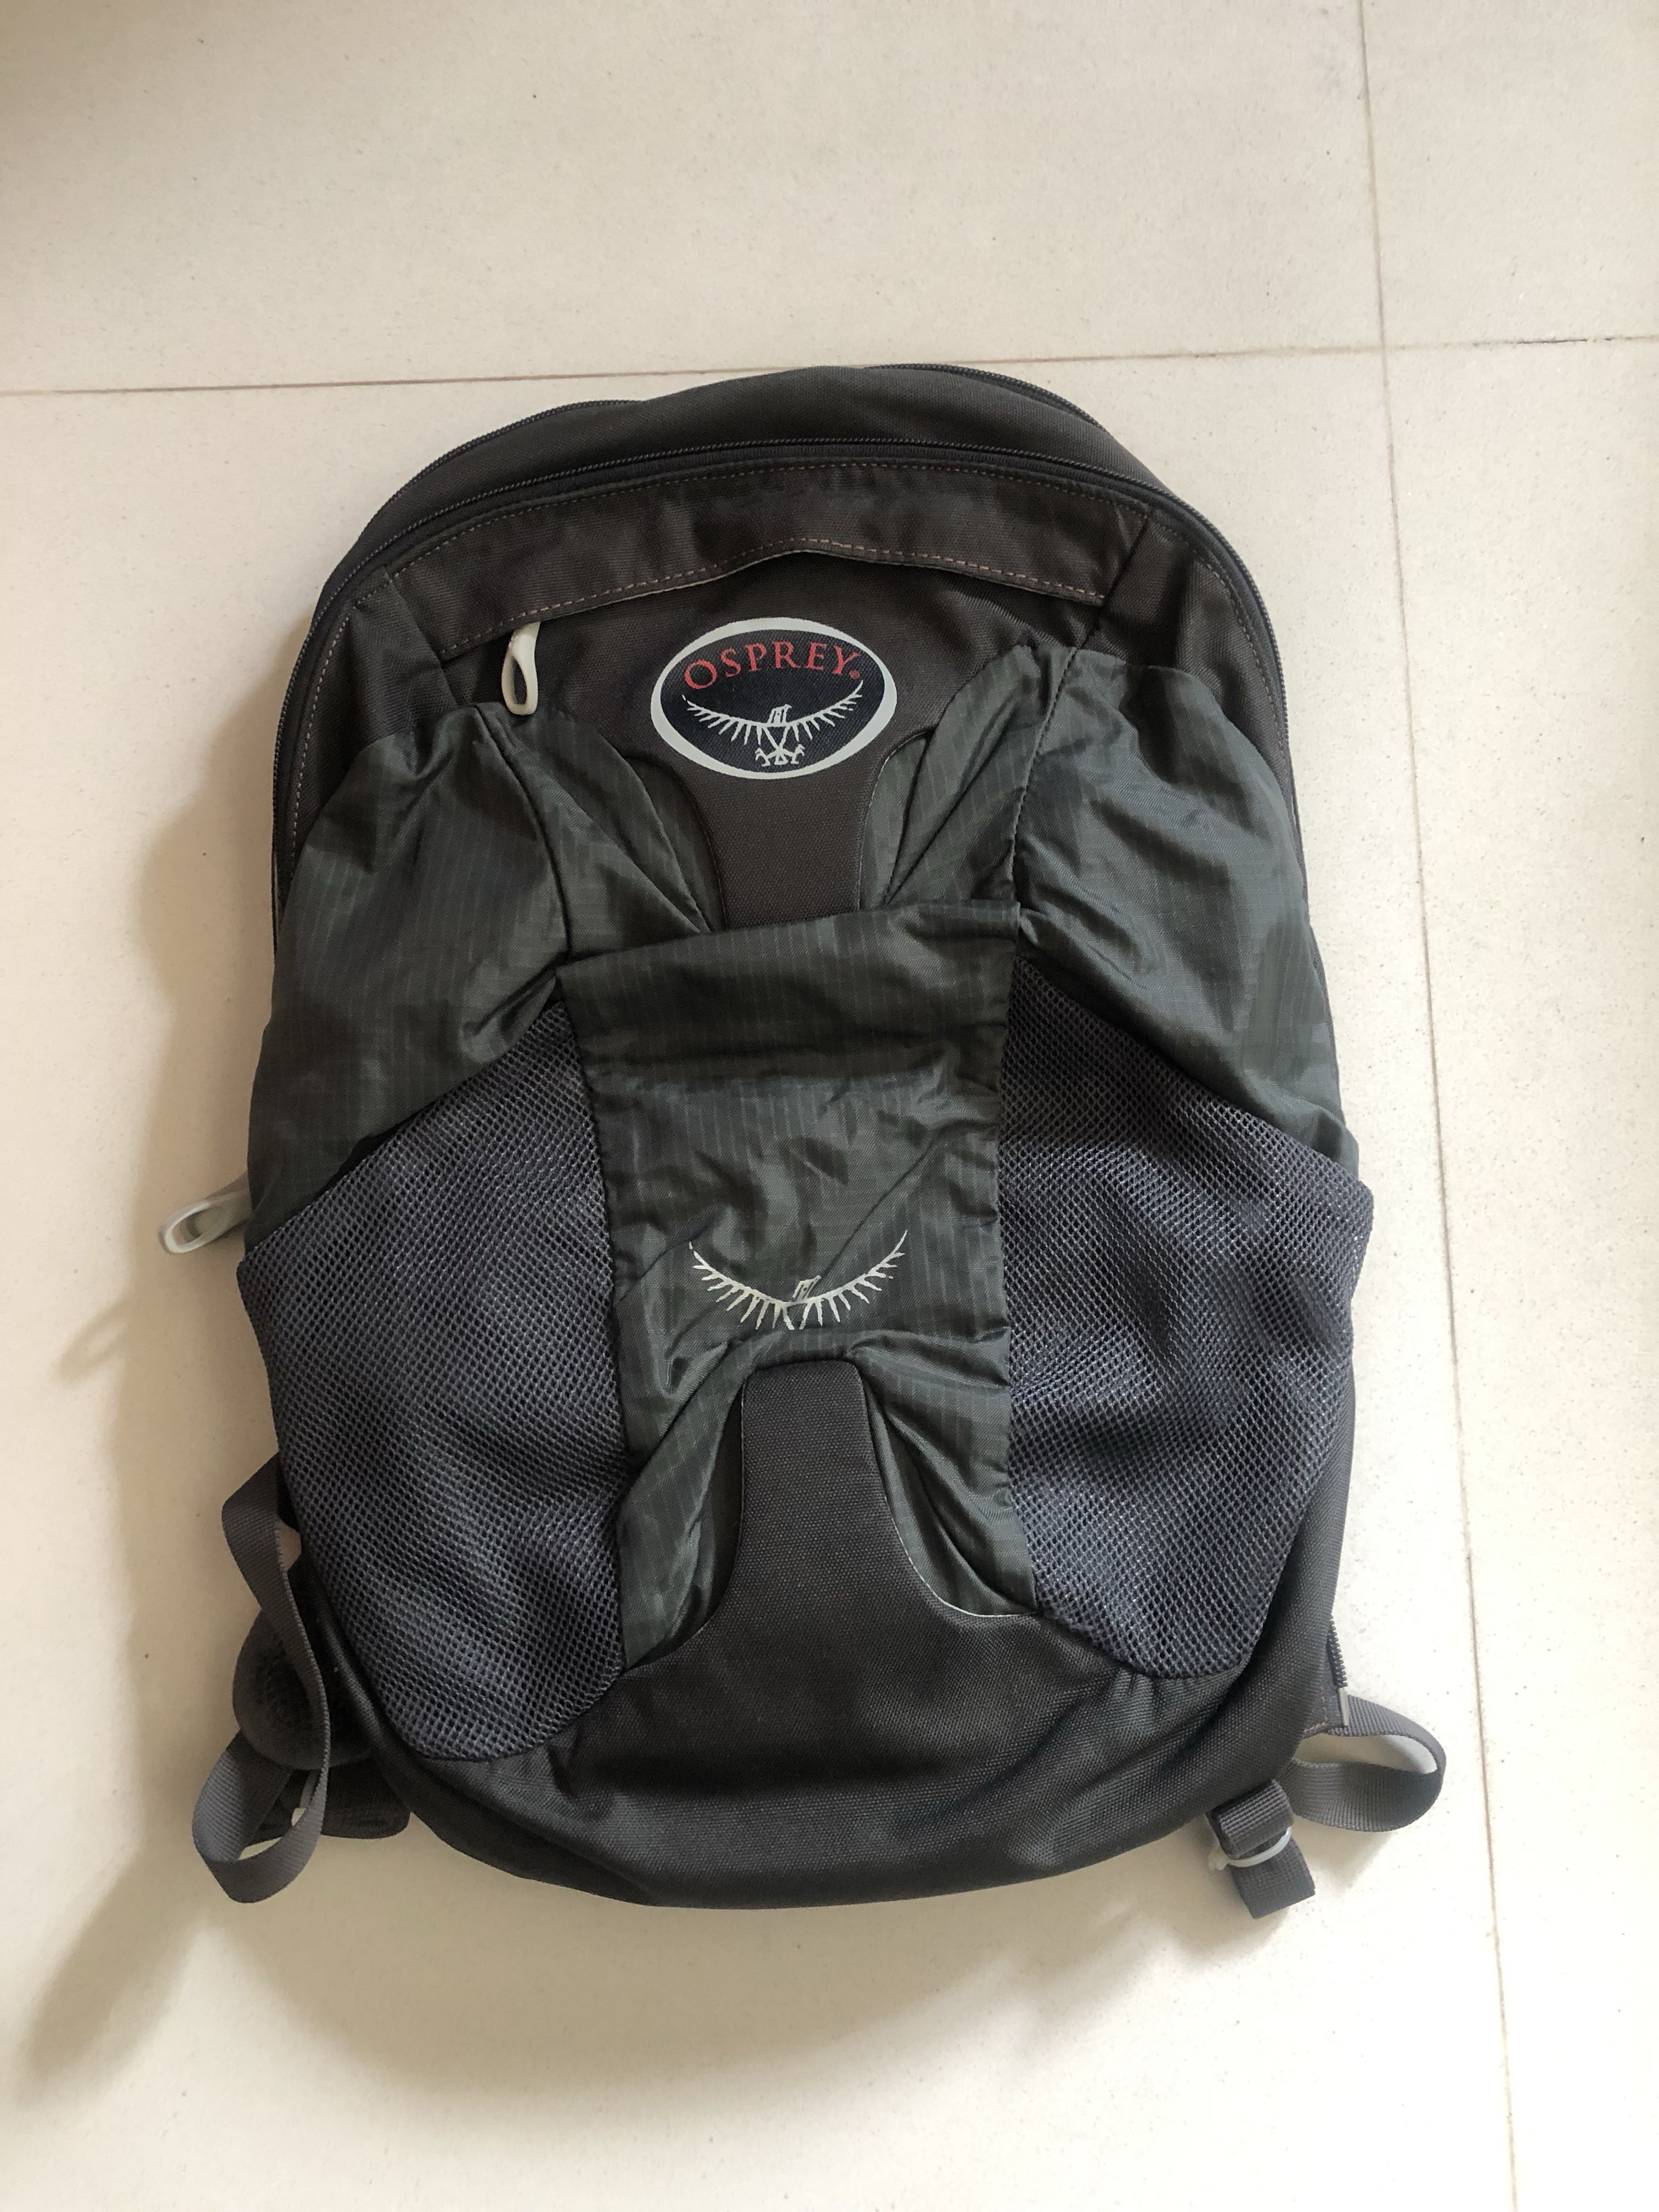 Osprey Farpoint 15L day pack, Men's Fashion, Bags, Backpacks on Carousell